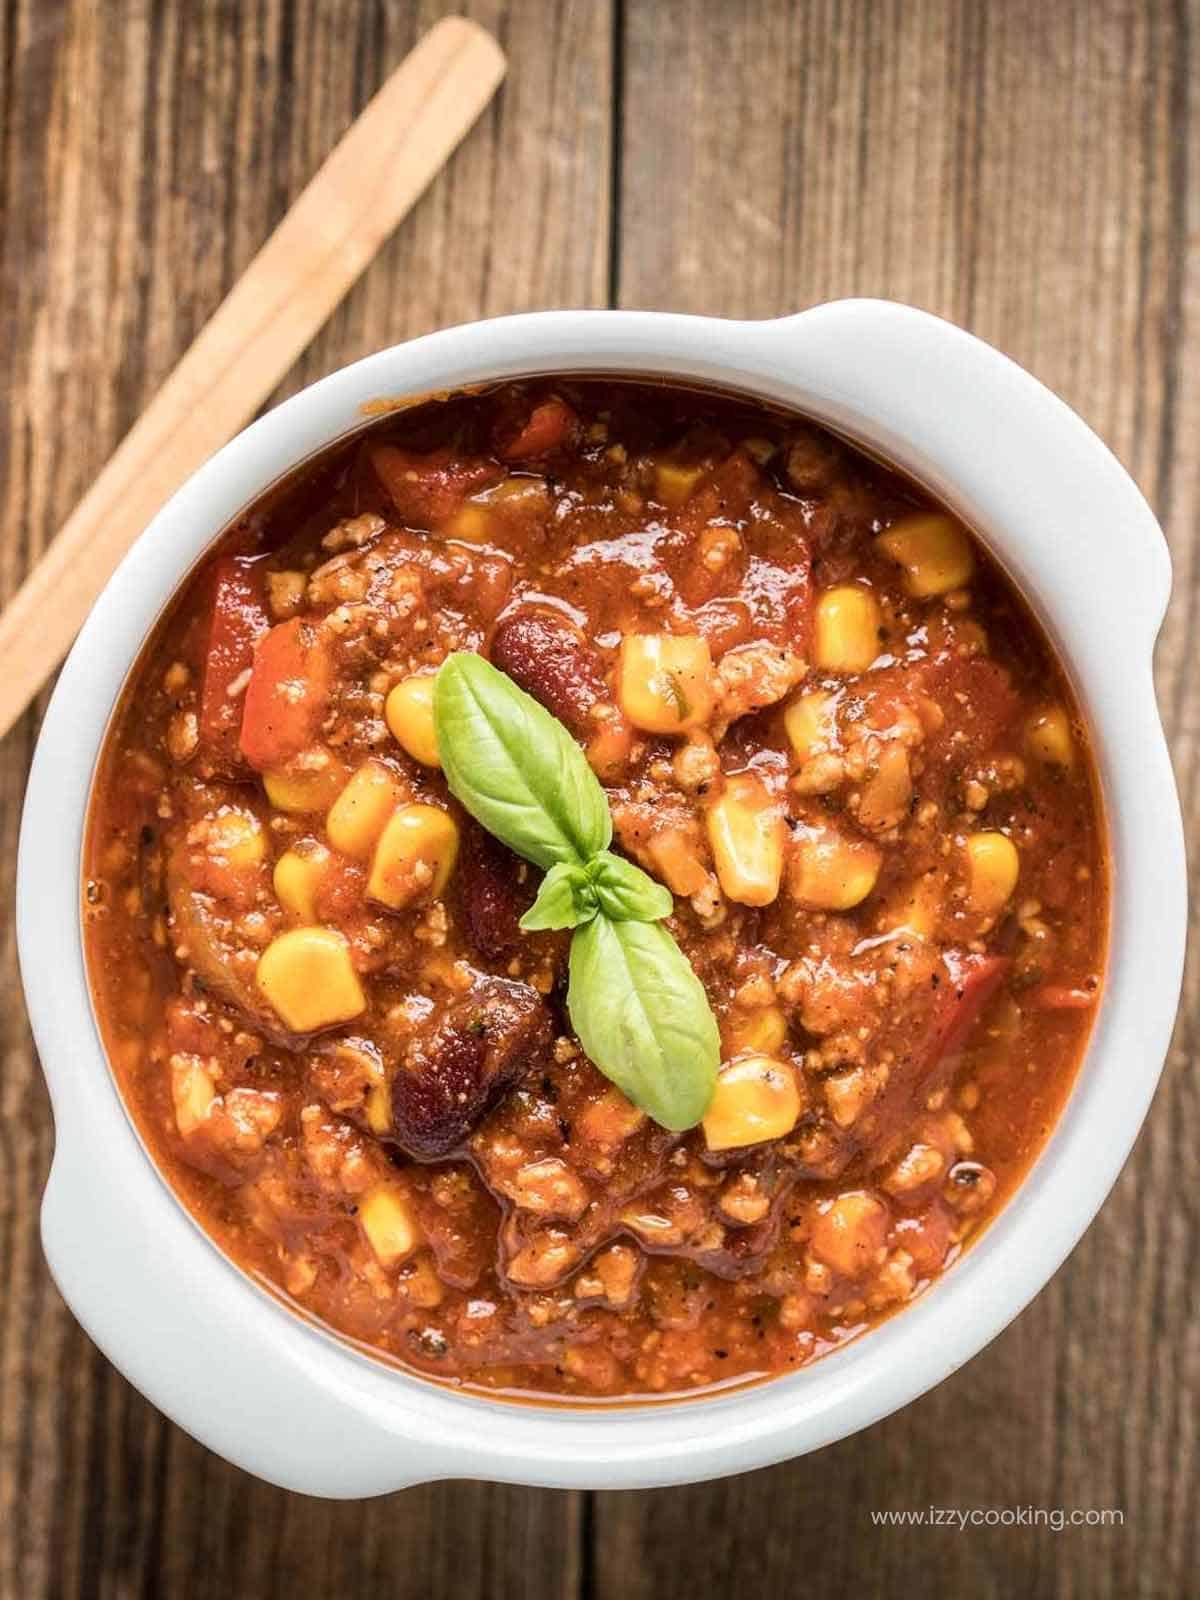 How to Thicken Chili: Ultimate guide